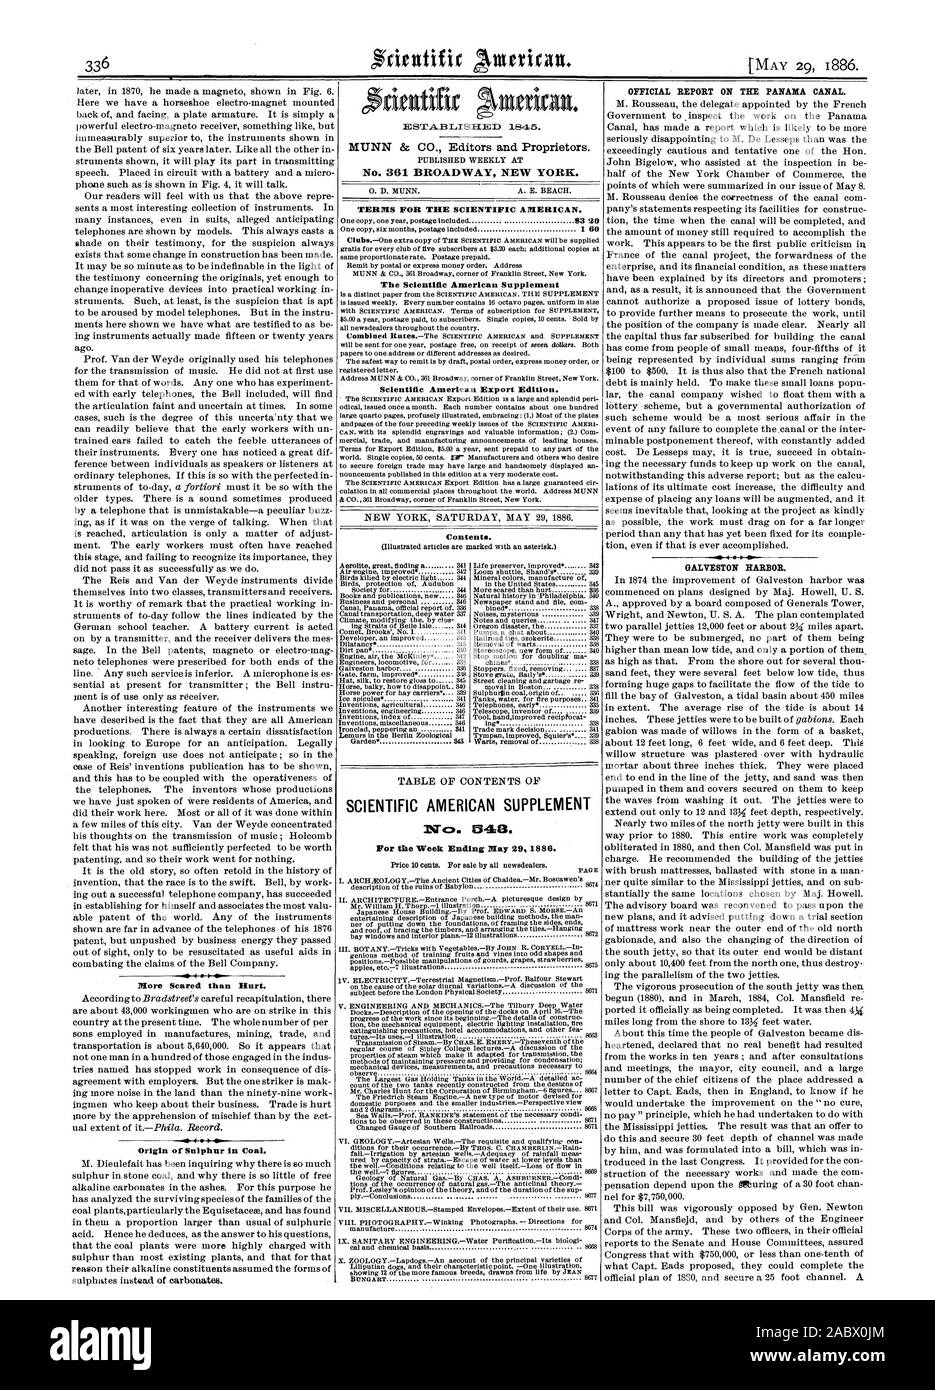 More Scared than Hurt. Origin of' Sulphur in Coal. STAB DISHED 18.45. MUNN 8z CO. Editors and Proprietors. PUBLISHED WEEKLY AT No. 361 BROADWAY NEW YORK. 0. D. MUNN. A. E. BEACH. TERMS FOR THE SCIENTIFIC AMERICAN. The Scientific American Supplement Scientific American Export Edition. Contents. (Illustrated articles are marked with an asterisk.) SCIENTIFIC AMERICAN SUPPLEMENT 1Vc:). 848. For the Week Ending May 29 1886. Price 10 cents. For sale by all newsdealers. OFFICIAL REPORT ON THE PANAMA CANAL. 4 0 41. GALVESTON HARBOR., 1886-05-29 Stock Photo